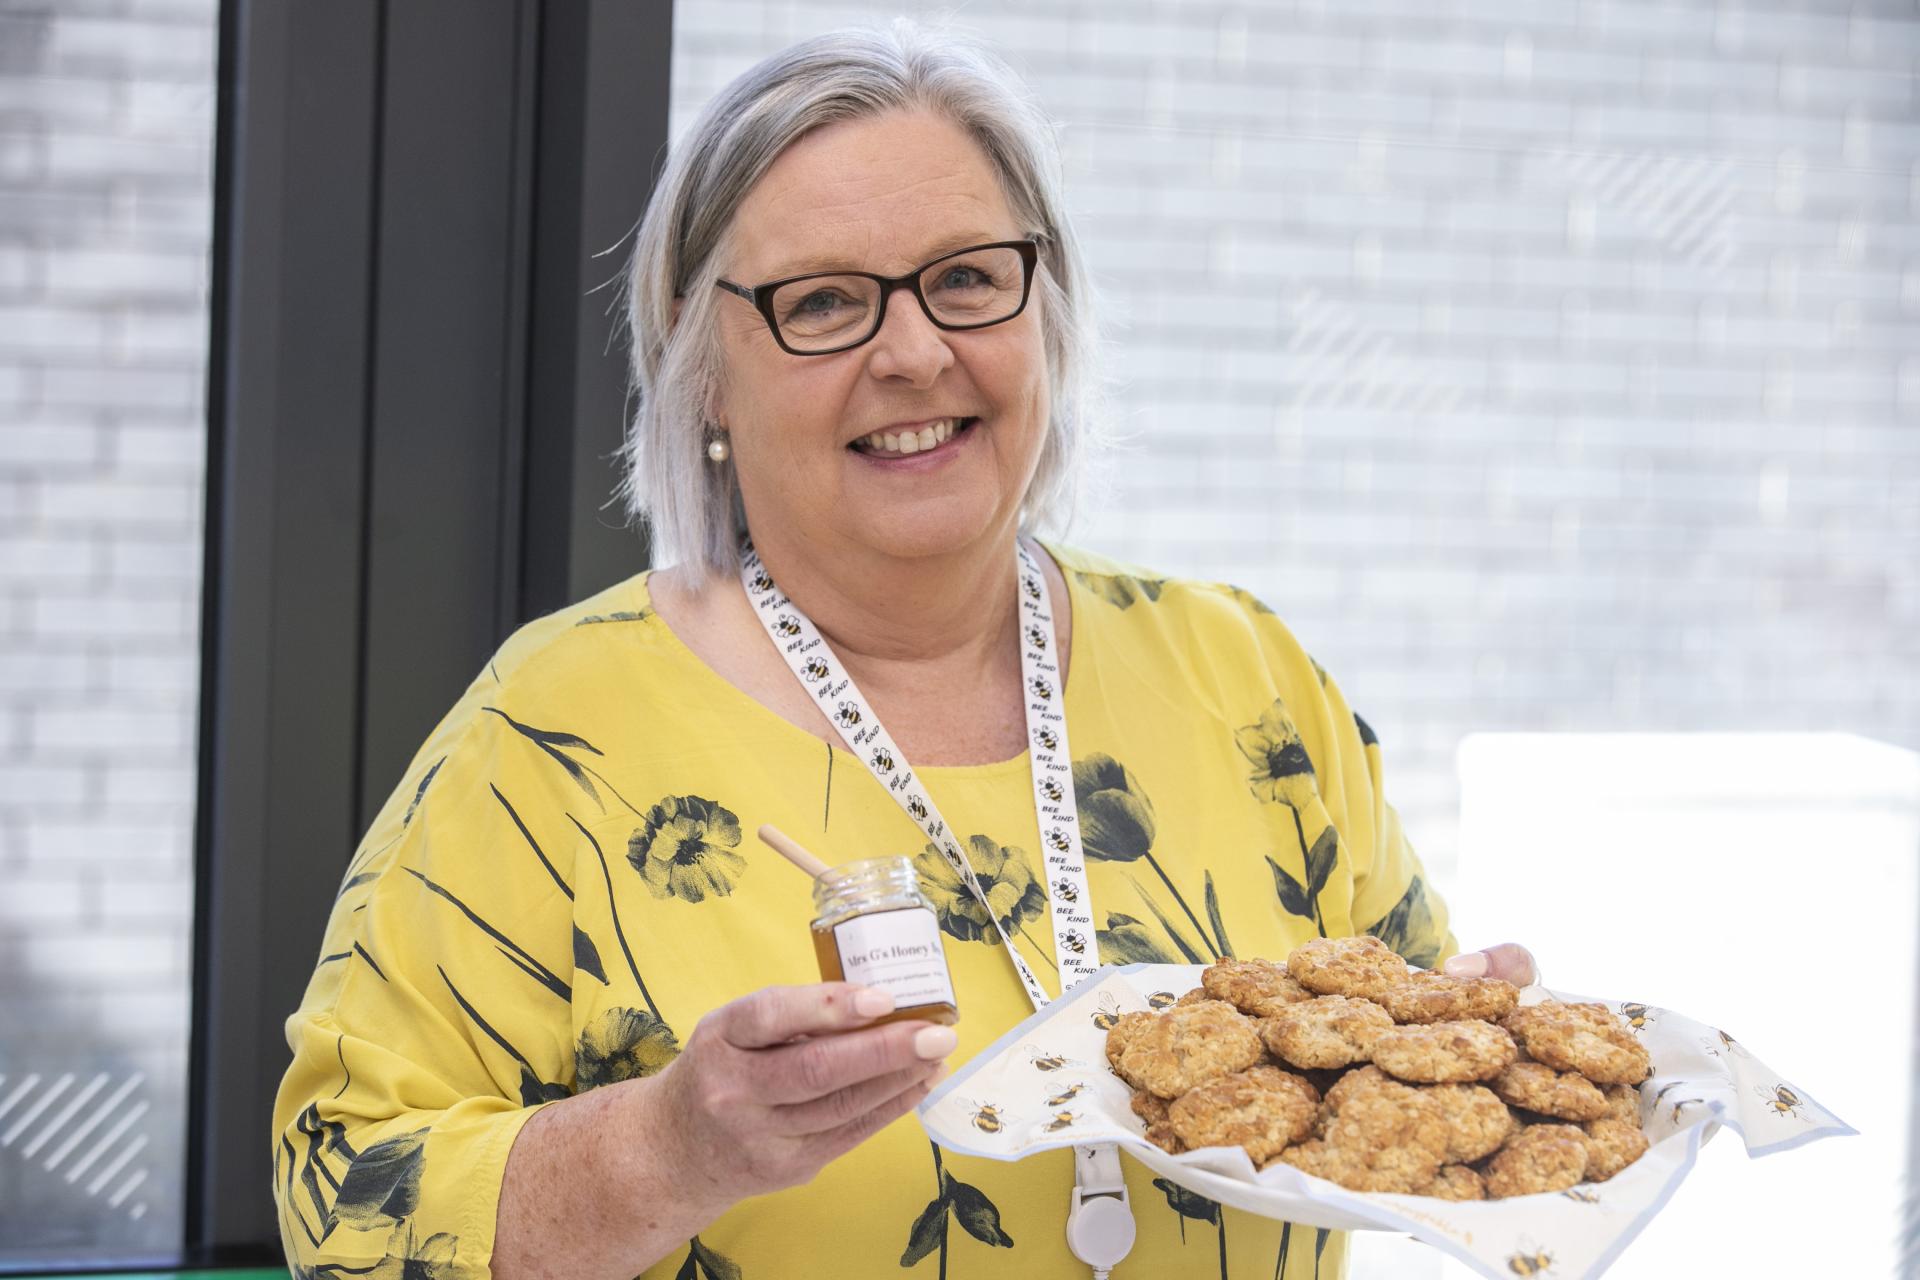 Shows Carol Grehan with her honey biscuits during the DCU Bake Off for Barretstown